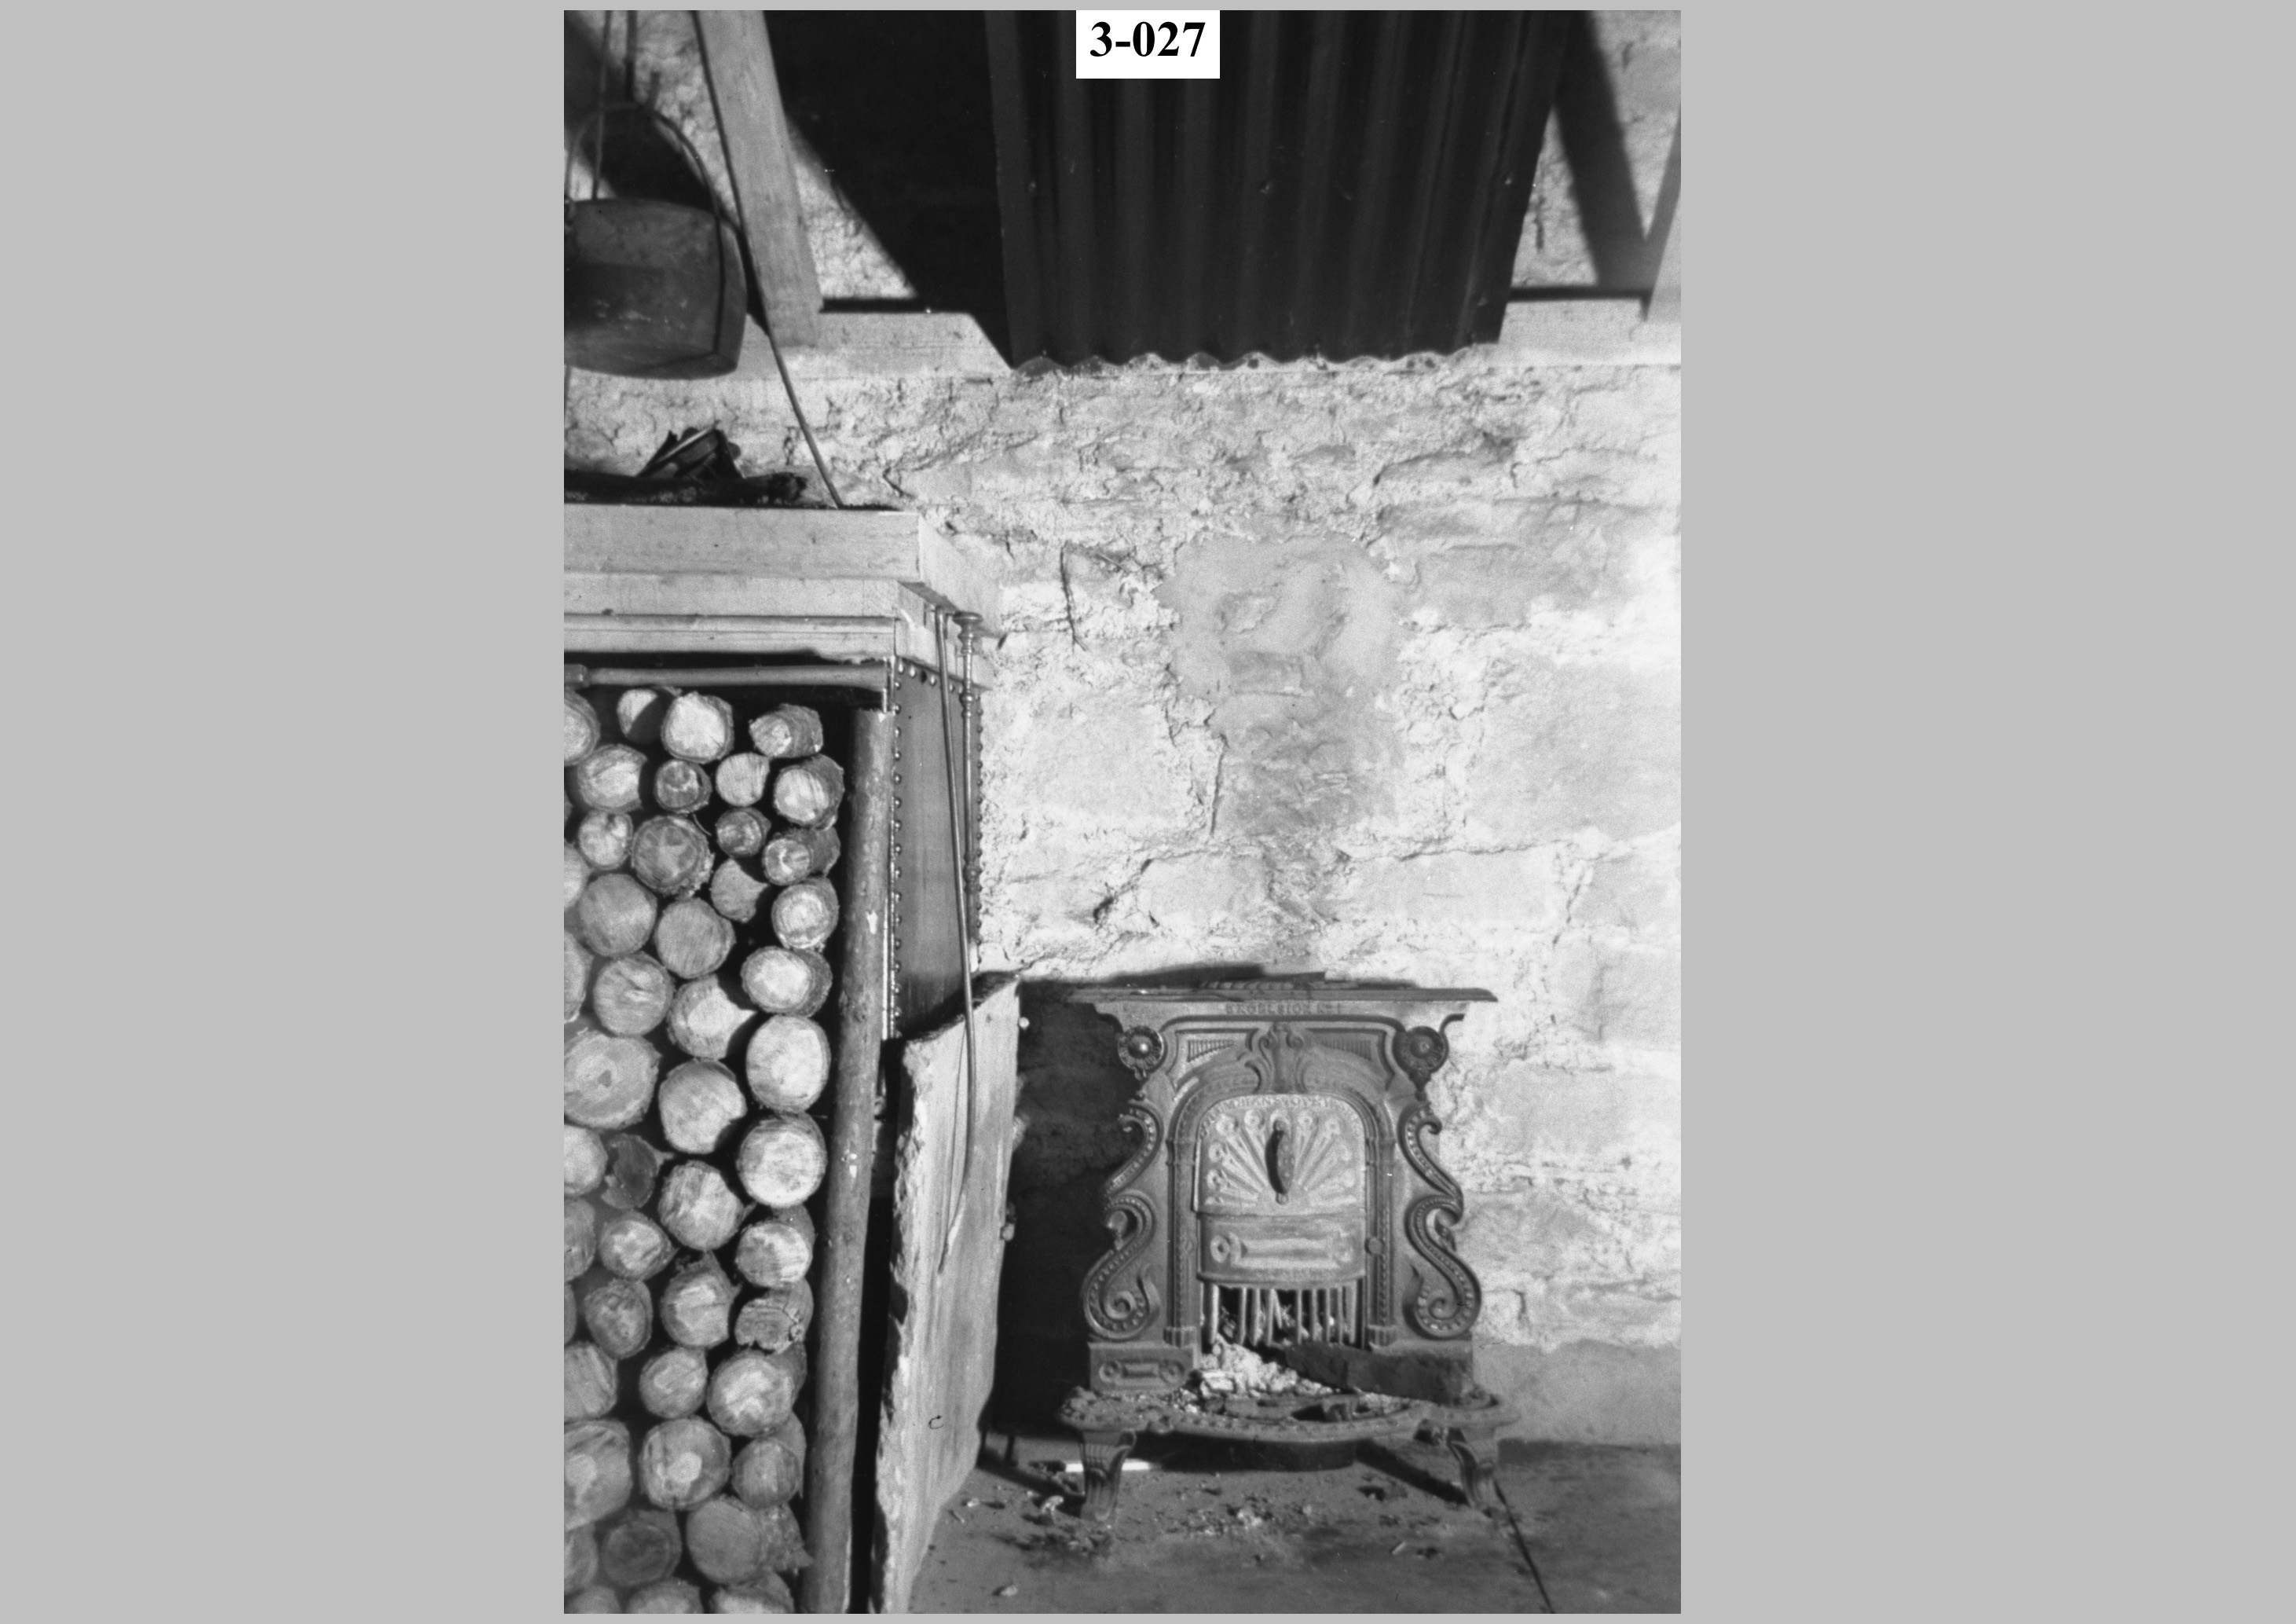 Woodstore and stove.jpg